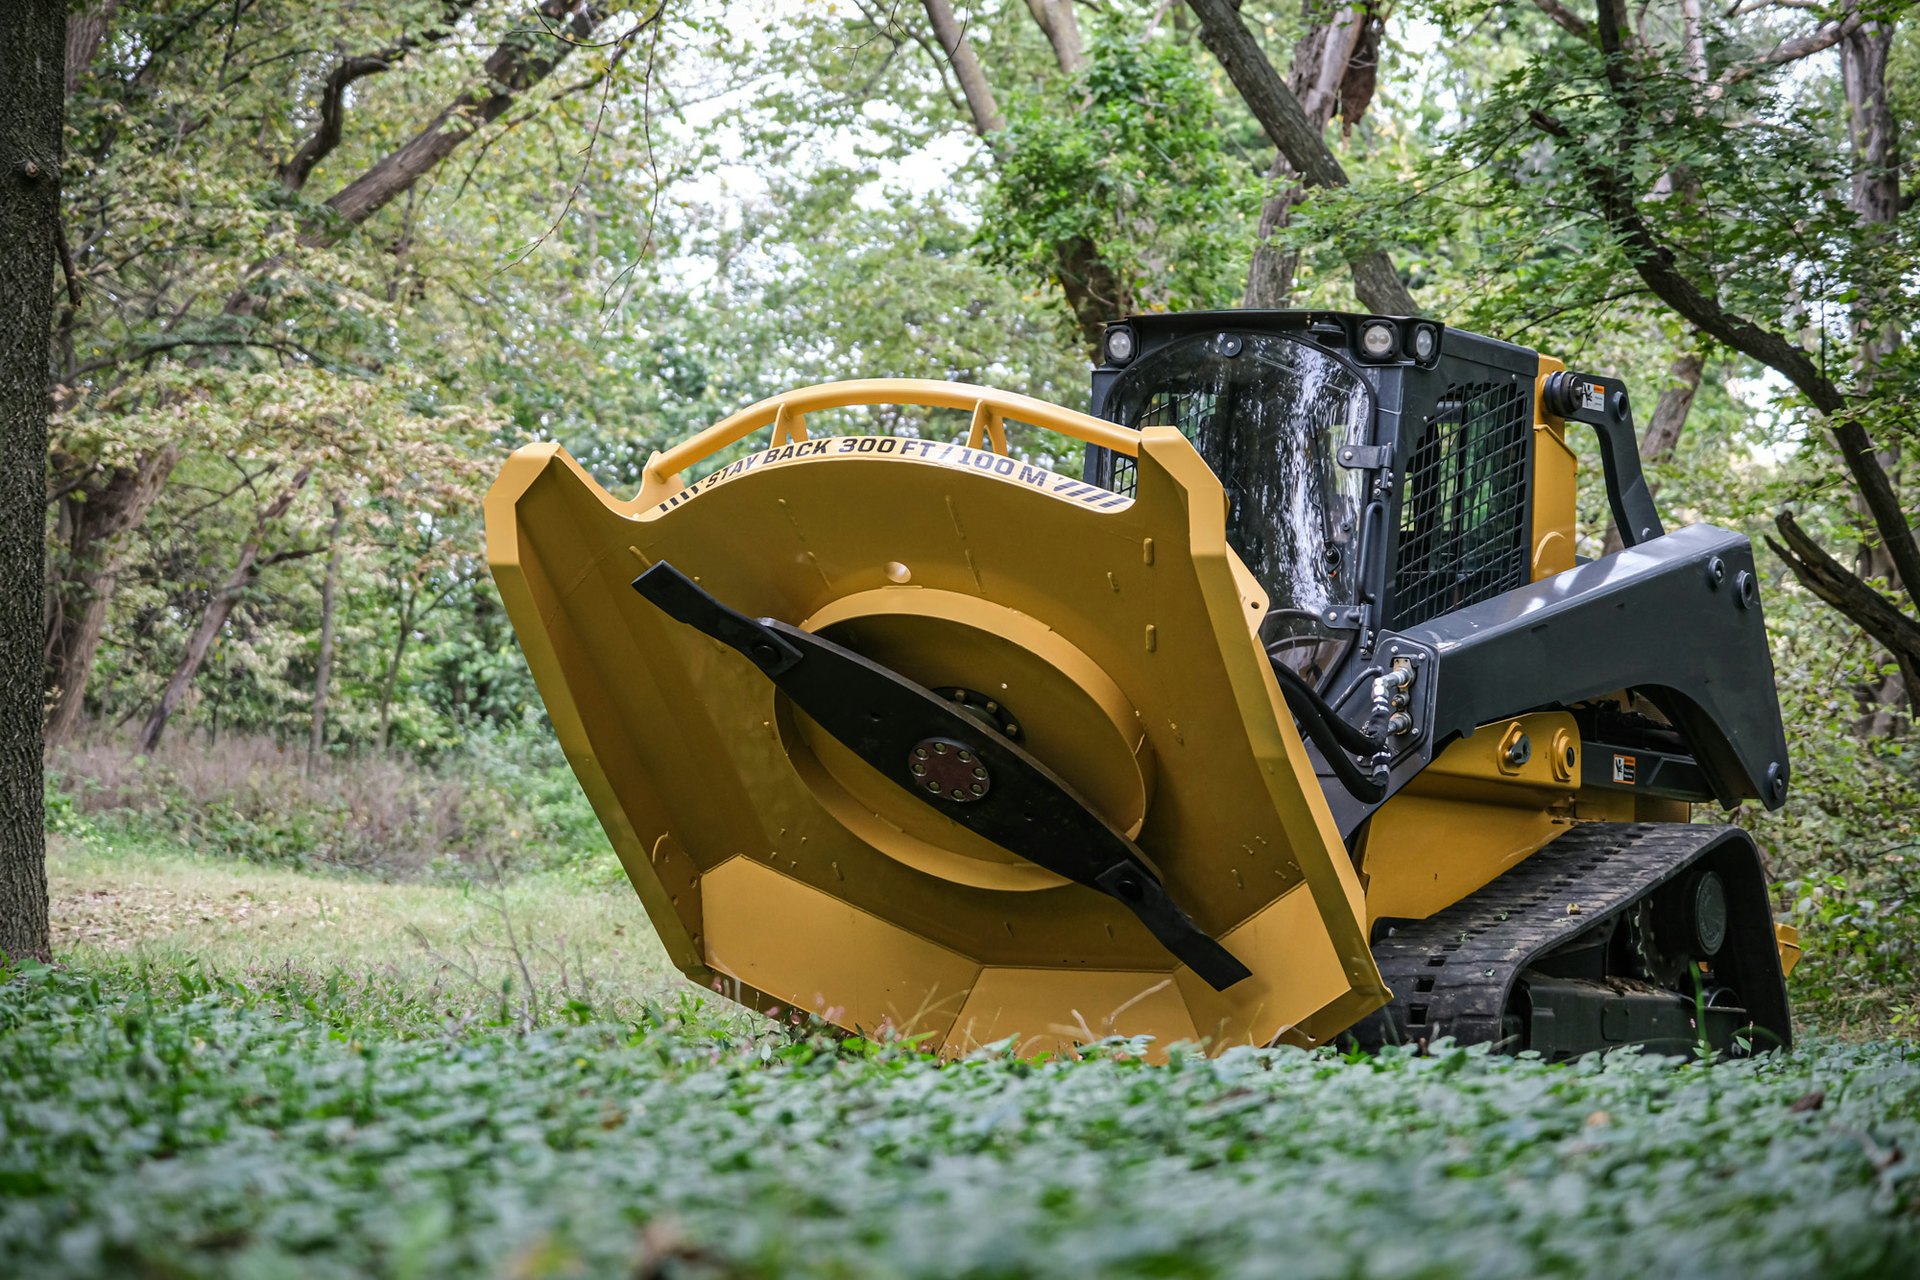 IronCraft Unveils X-treme Tree Reaper Brush Cutter From: IRONCRAFT